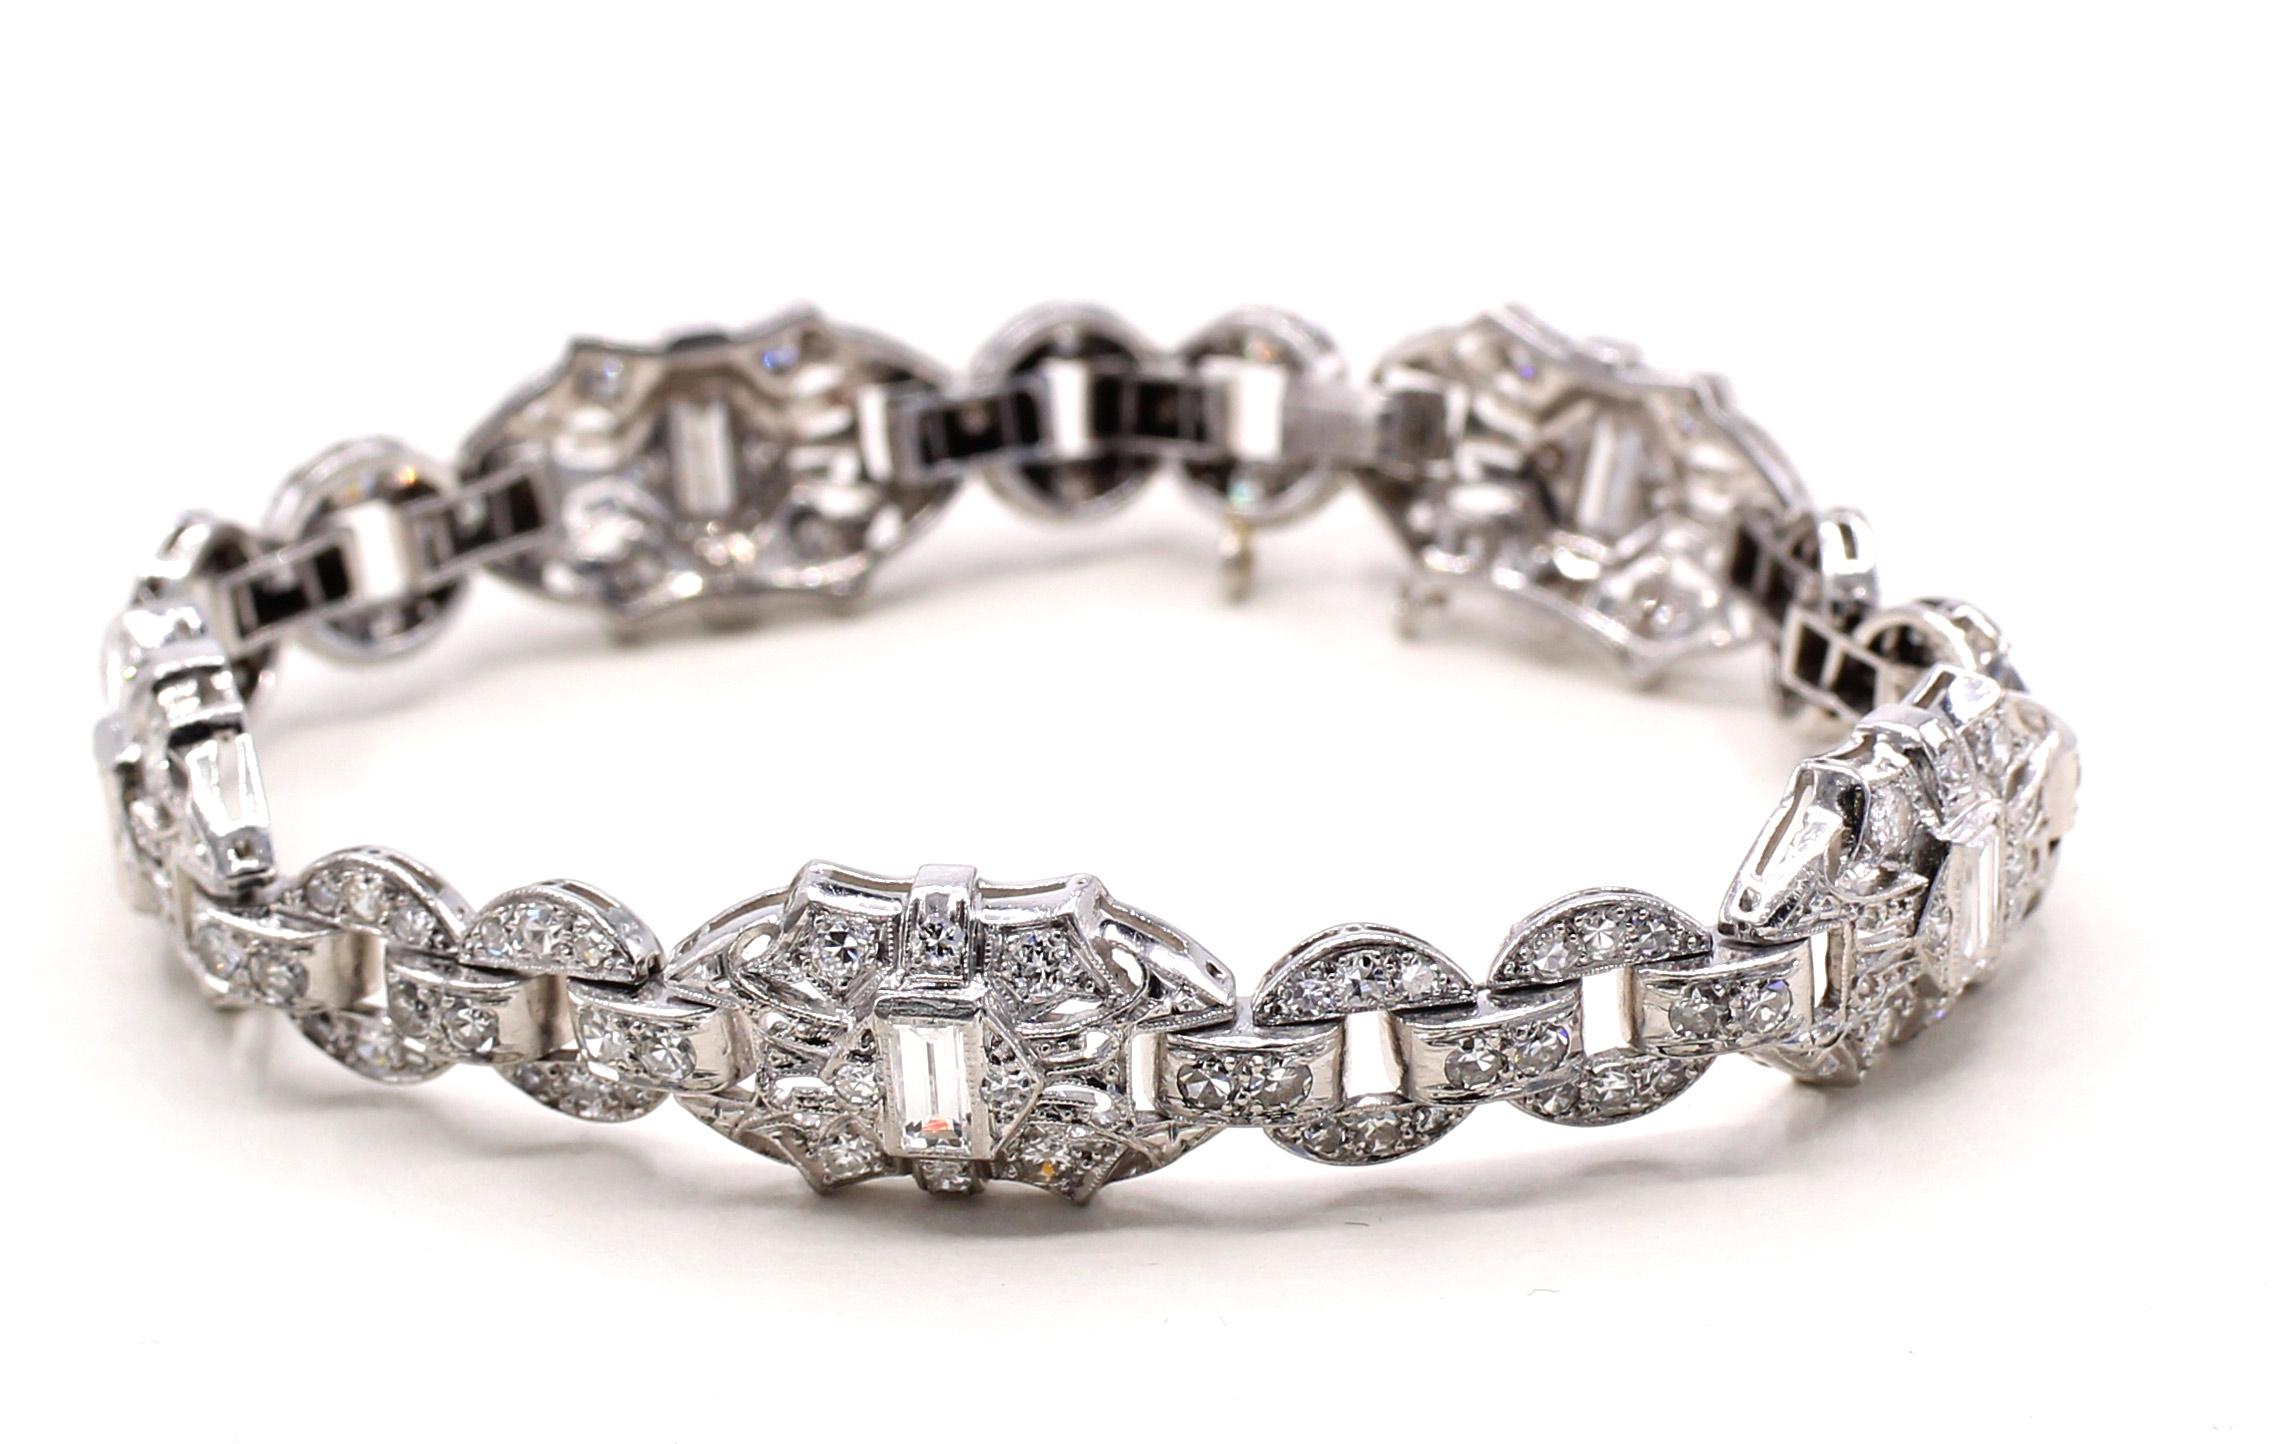 Art Deco bracelet from ca 1935 handcrafted in platinum and set with round old cut and baguette diamonds. Geometric design with flexible links, 6.65 inches long.